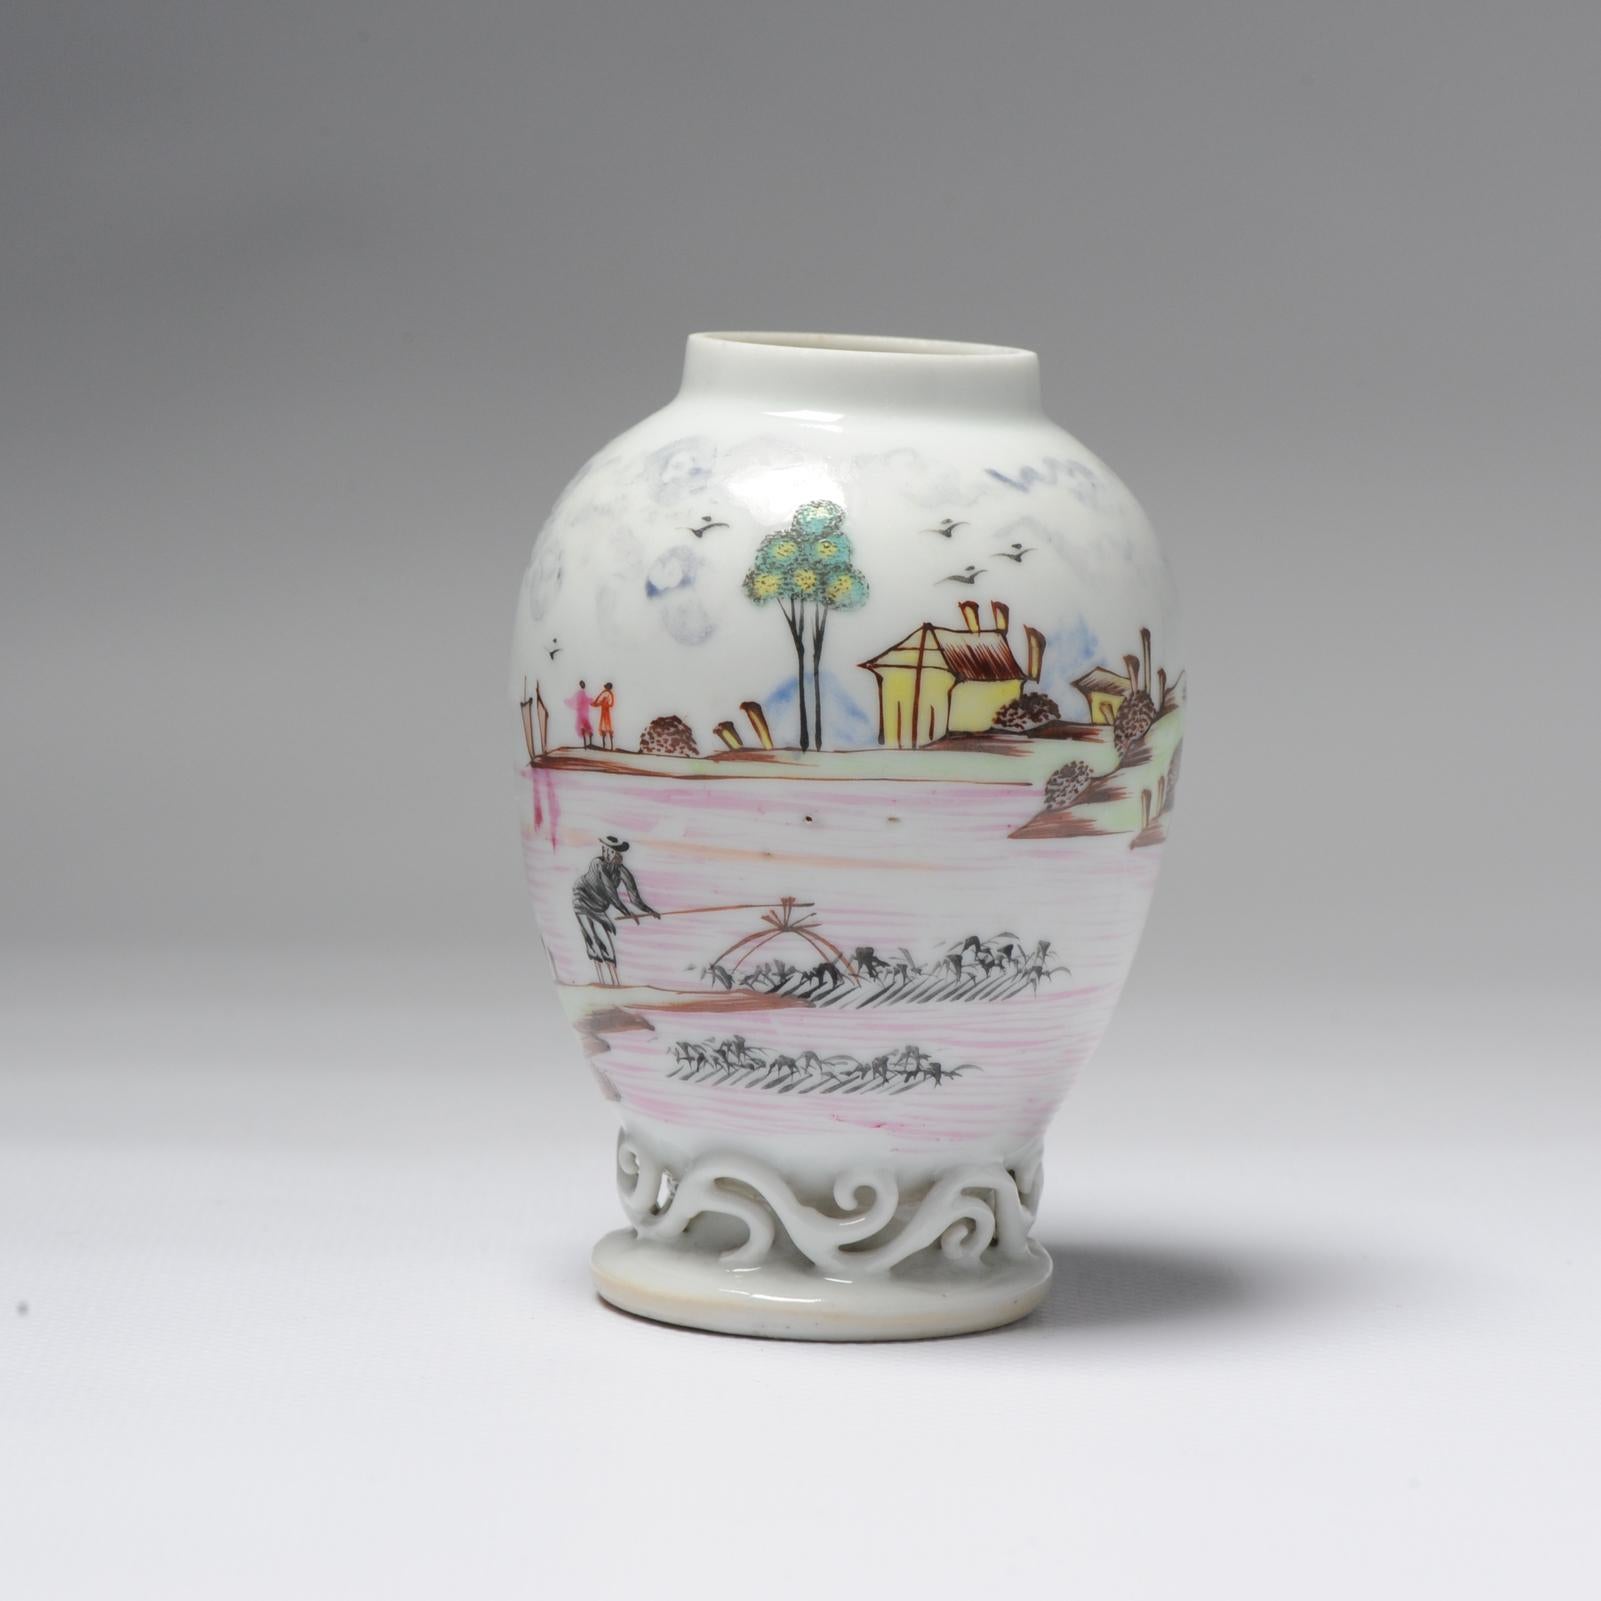 Antique Chinese Famille Rose Porcelain Tea Caddy Qianlong China ca 1750 In Good Condition For Sale In Amsterdam, Noord Holland